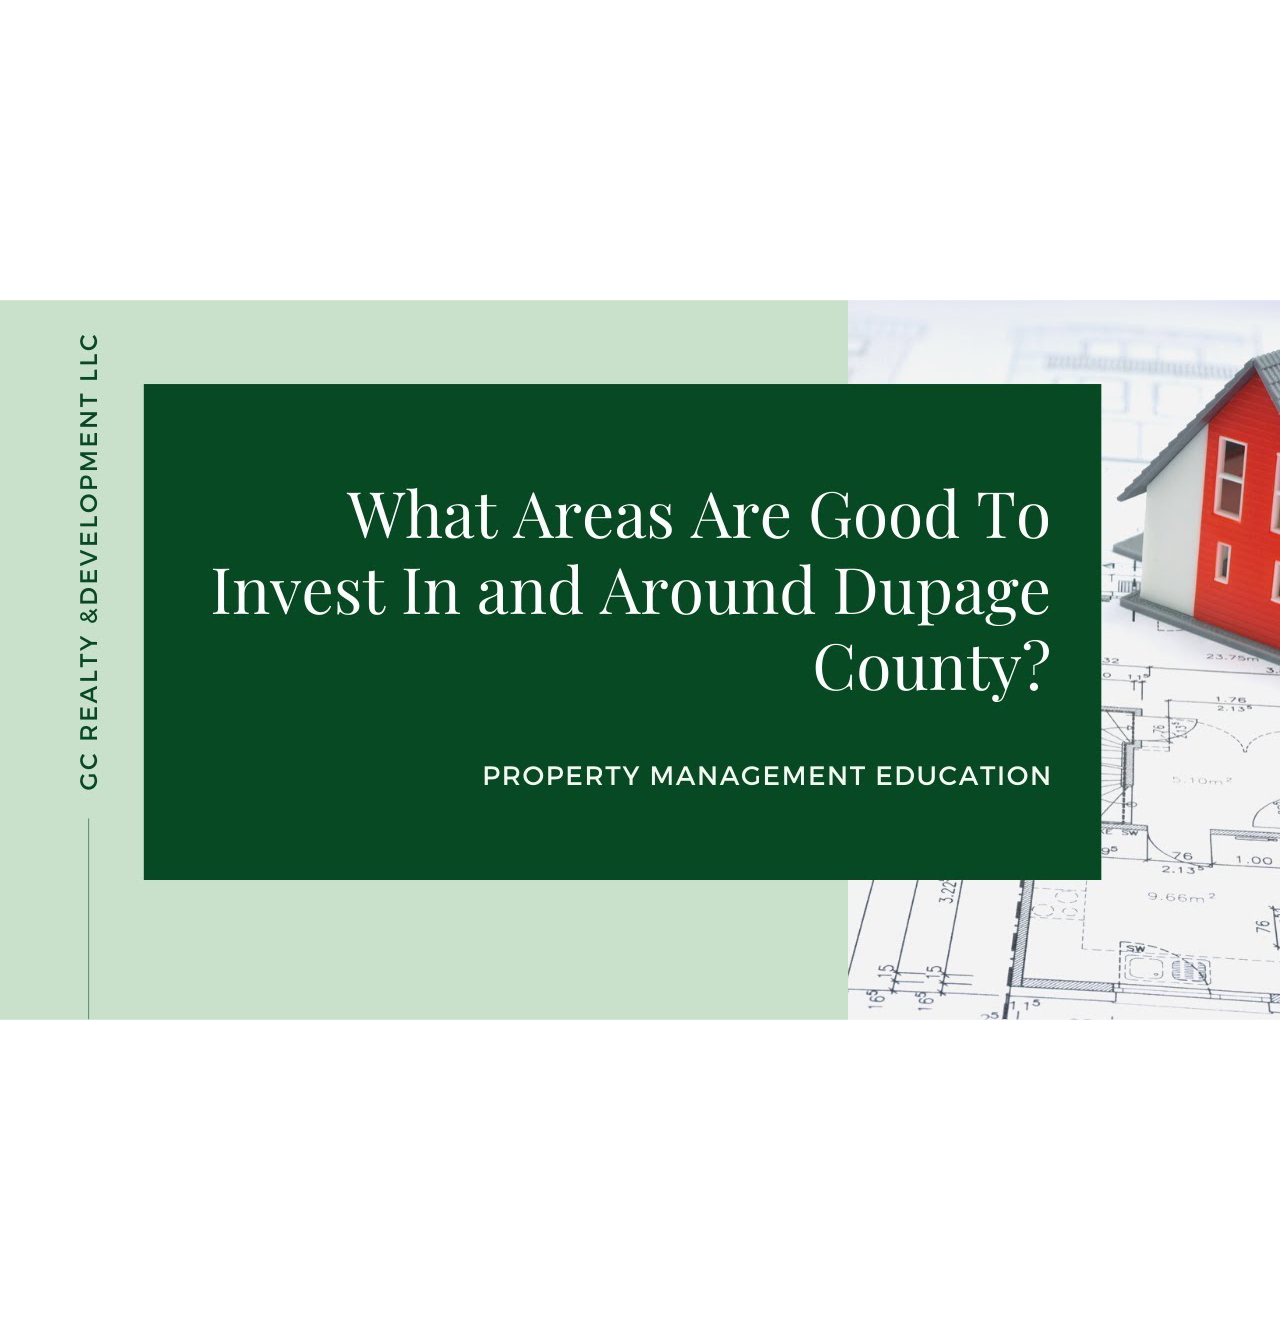 What are the best places to invest in and around DuPage County?